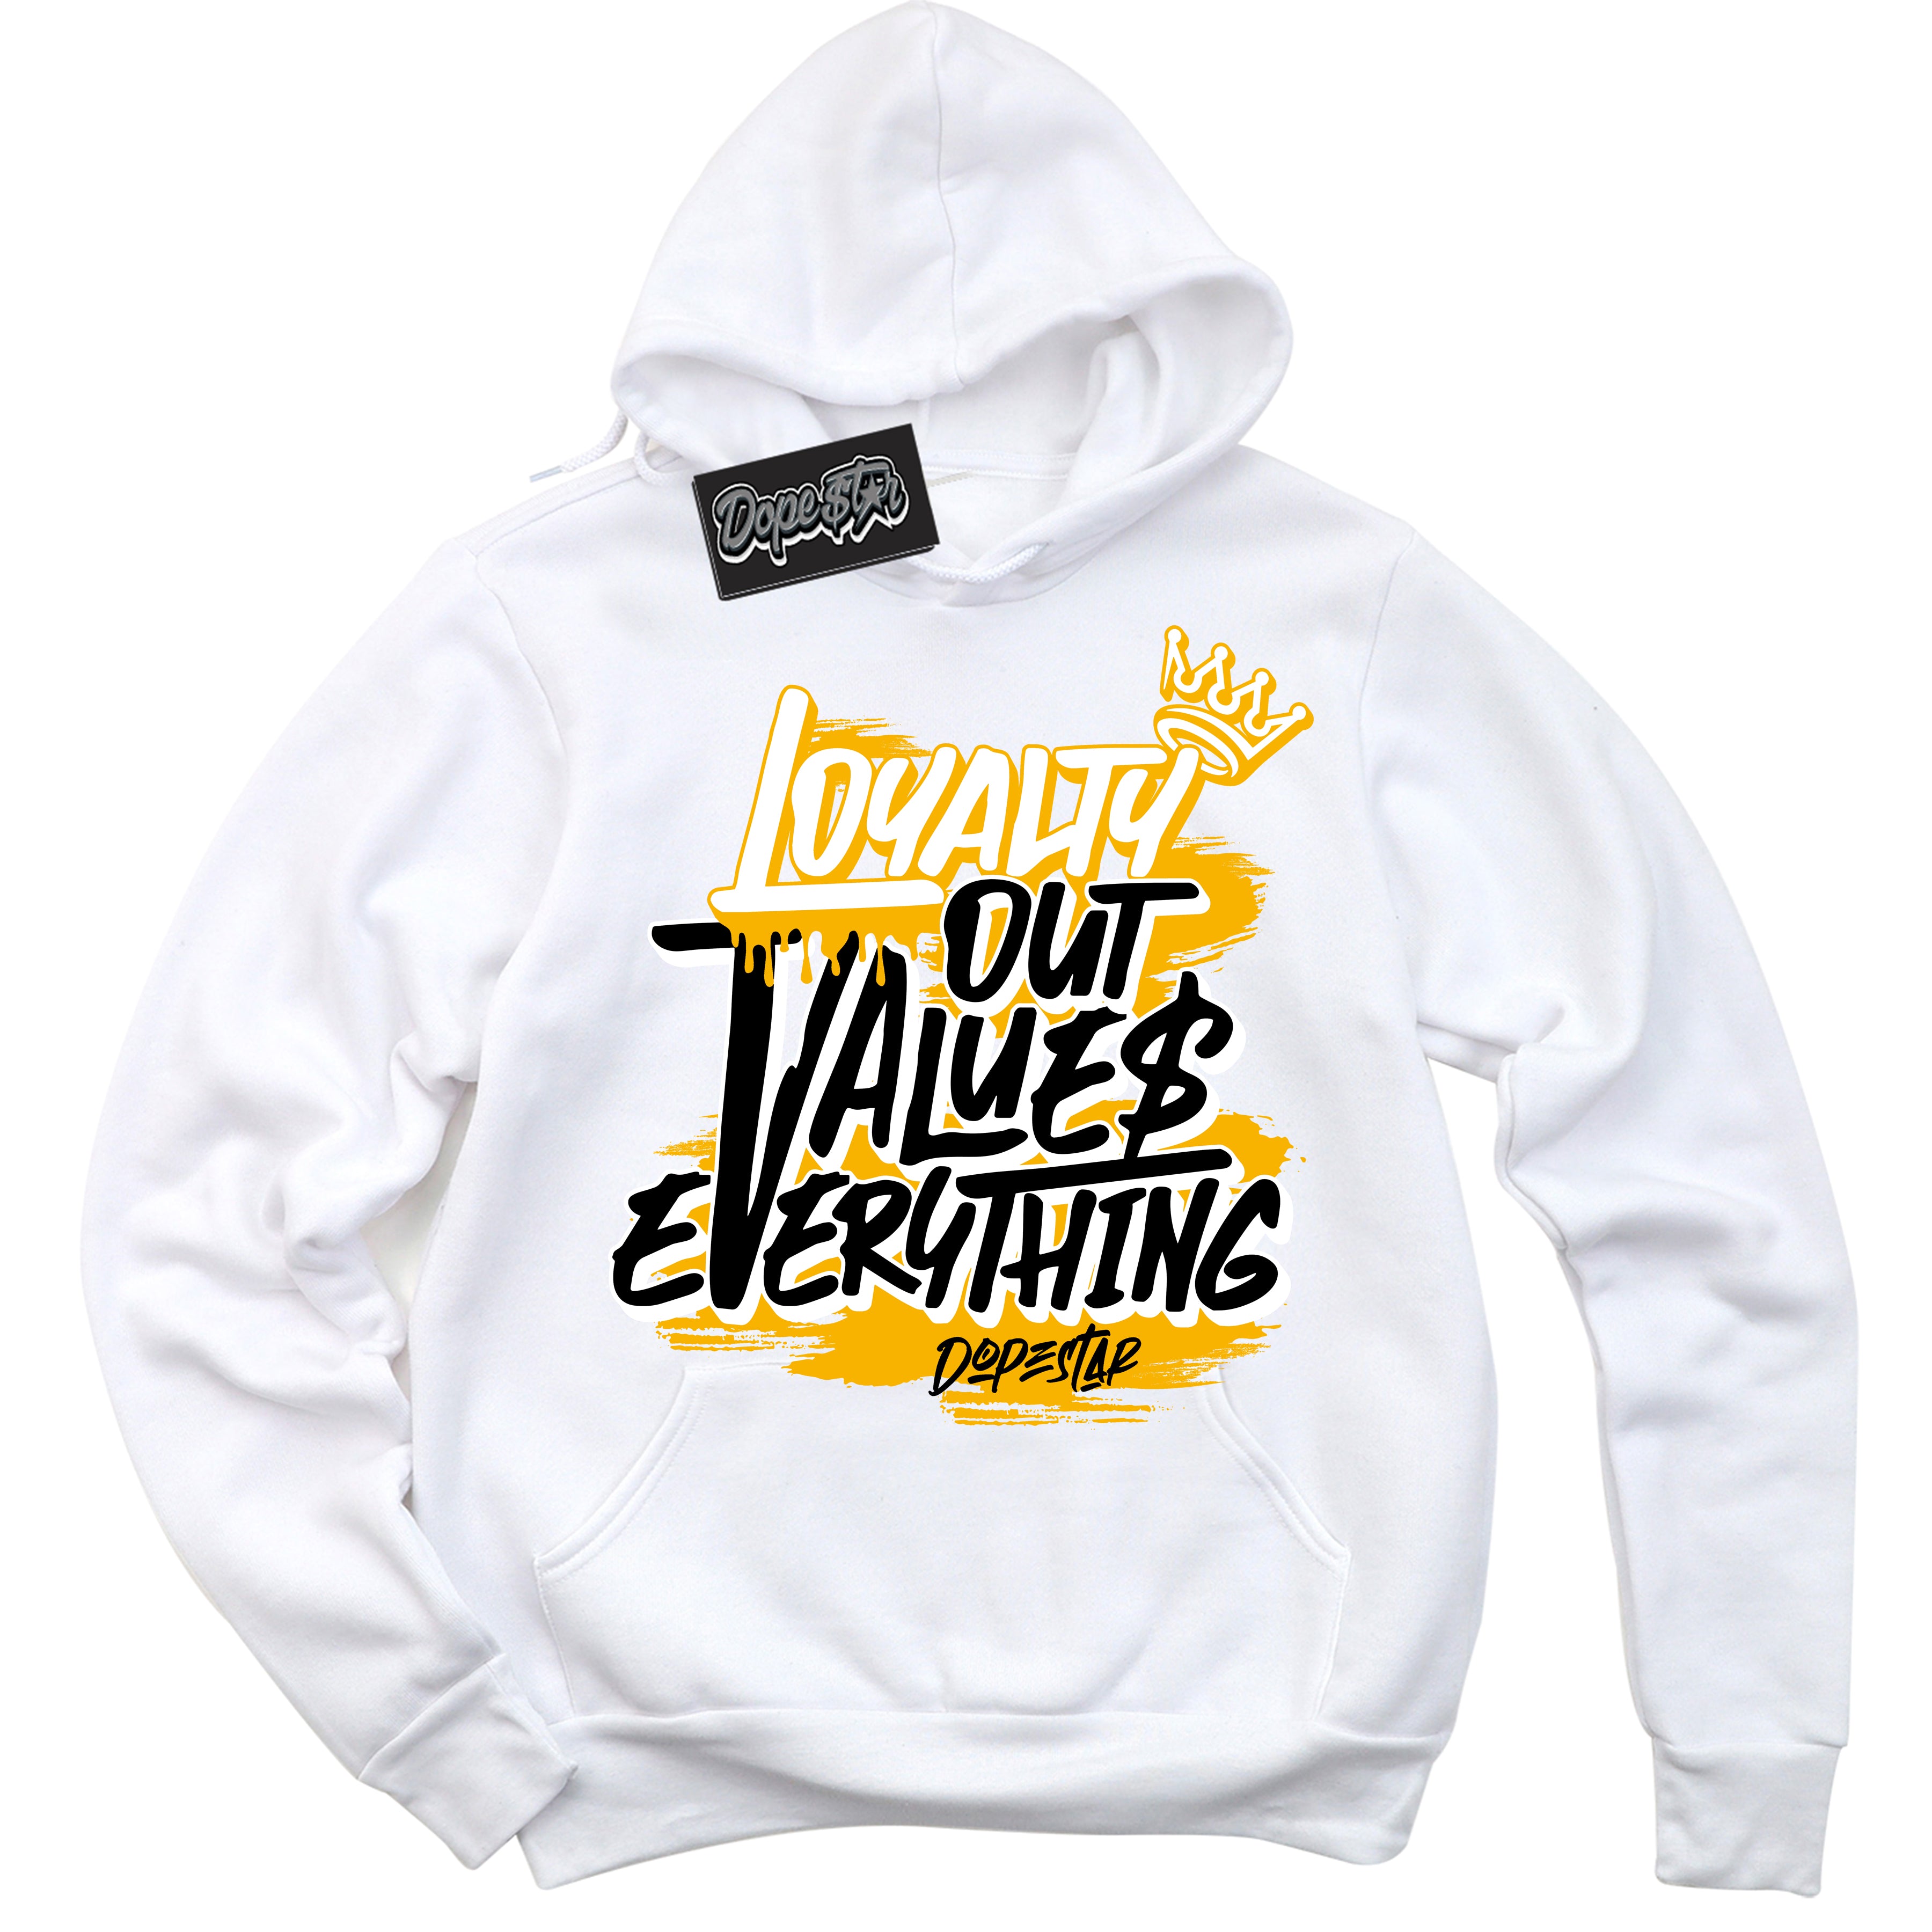 Cool White Hoodie with “ Loyalty Out Values Everything ”  design that Perfectly Matches Reverse Goldenrod 2024 Sneakers.